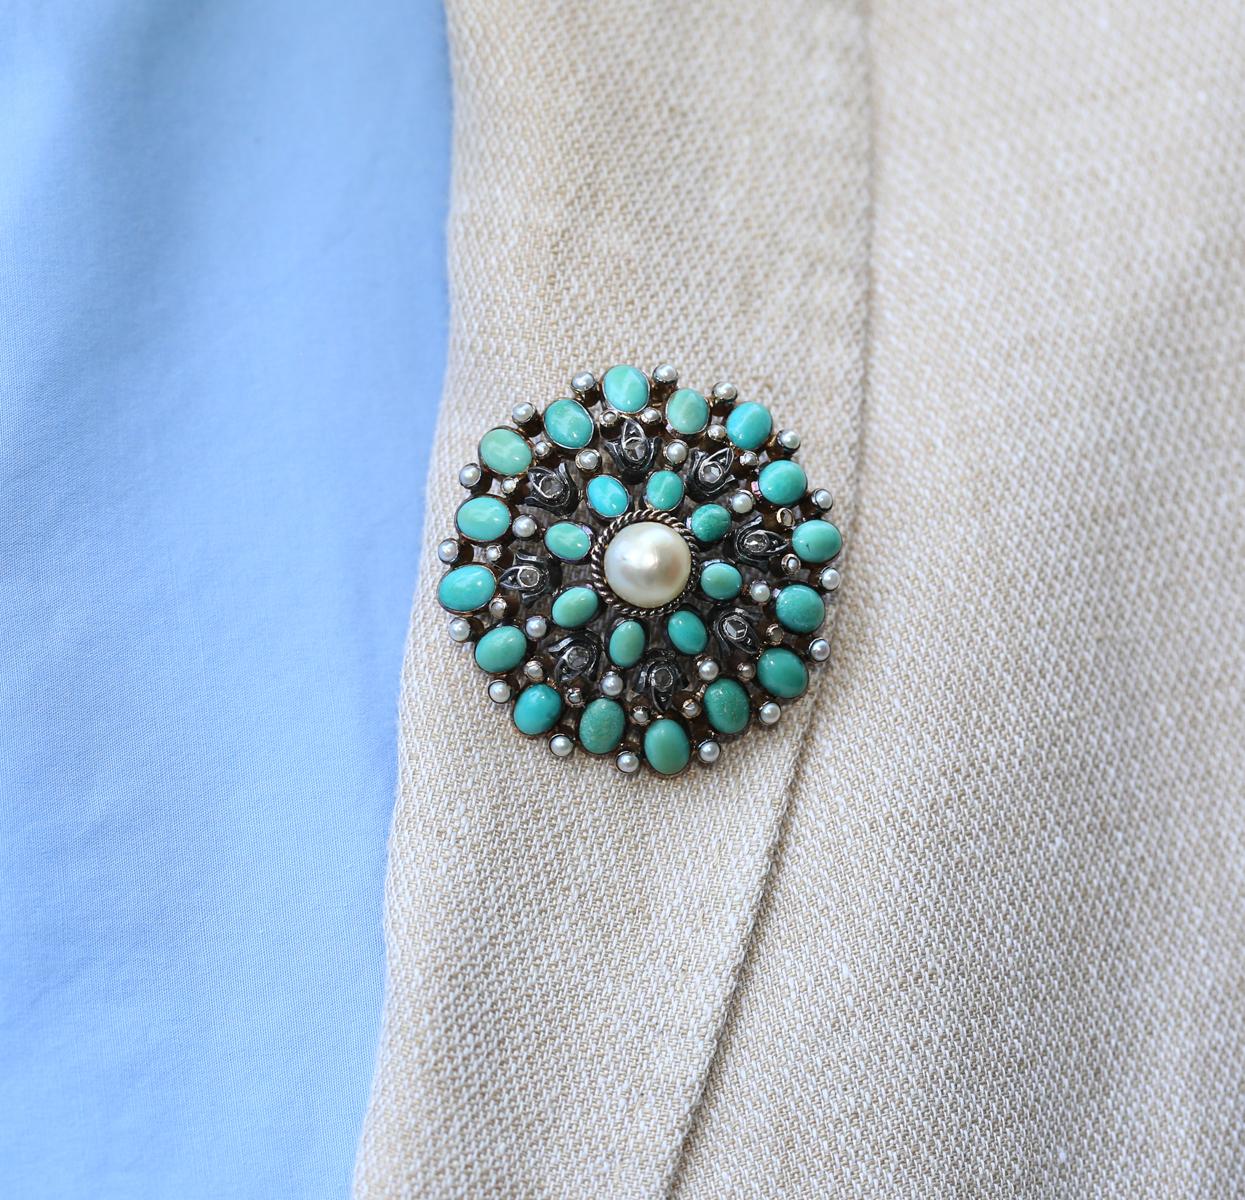 Oval Cut Brooch Turquoise Gold Silver Diamonds Pearl Portugal, 1940